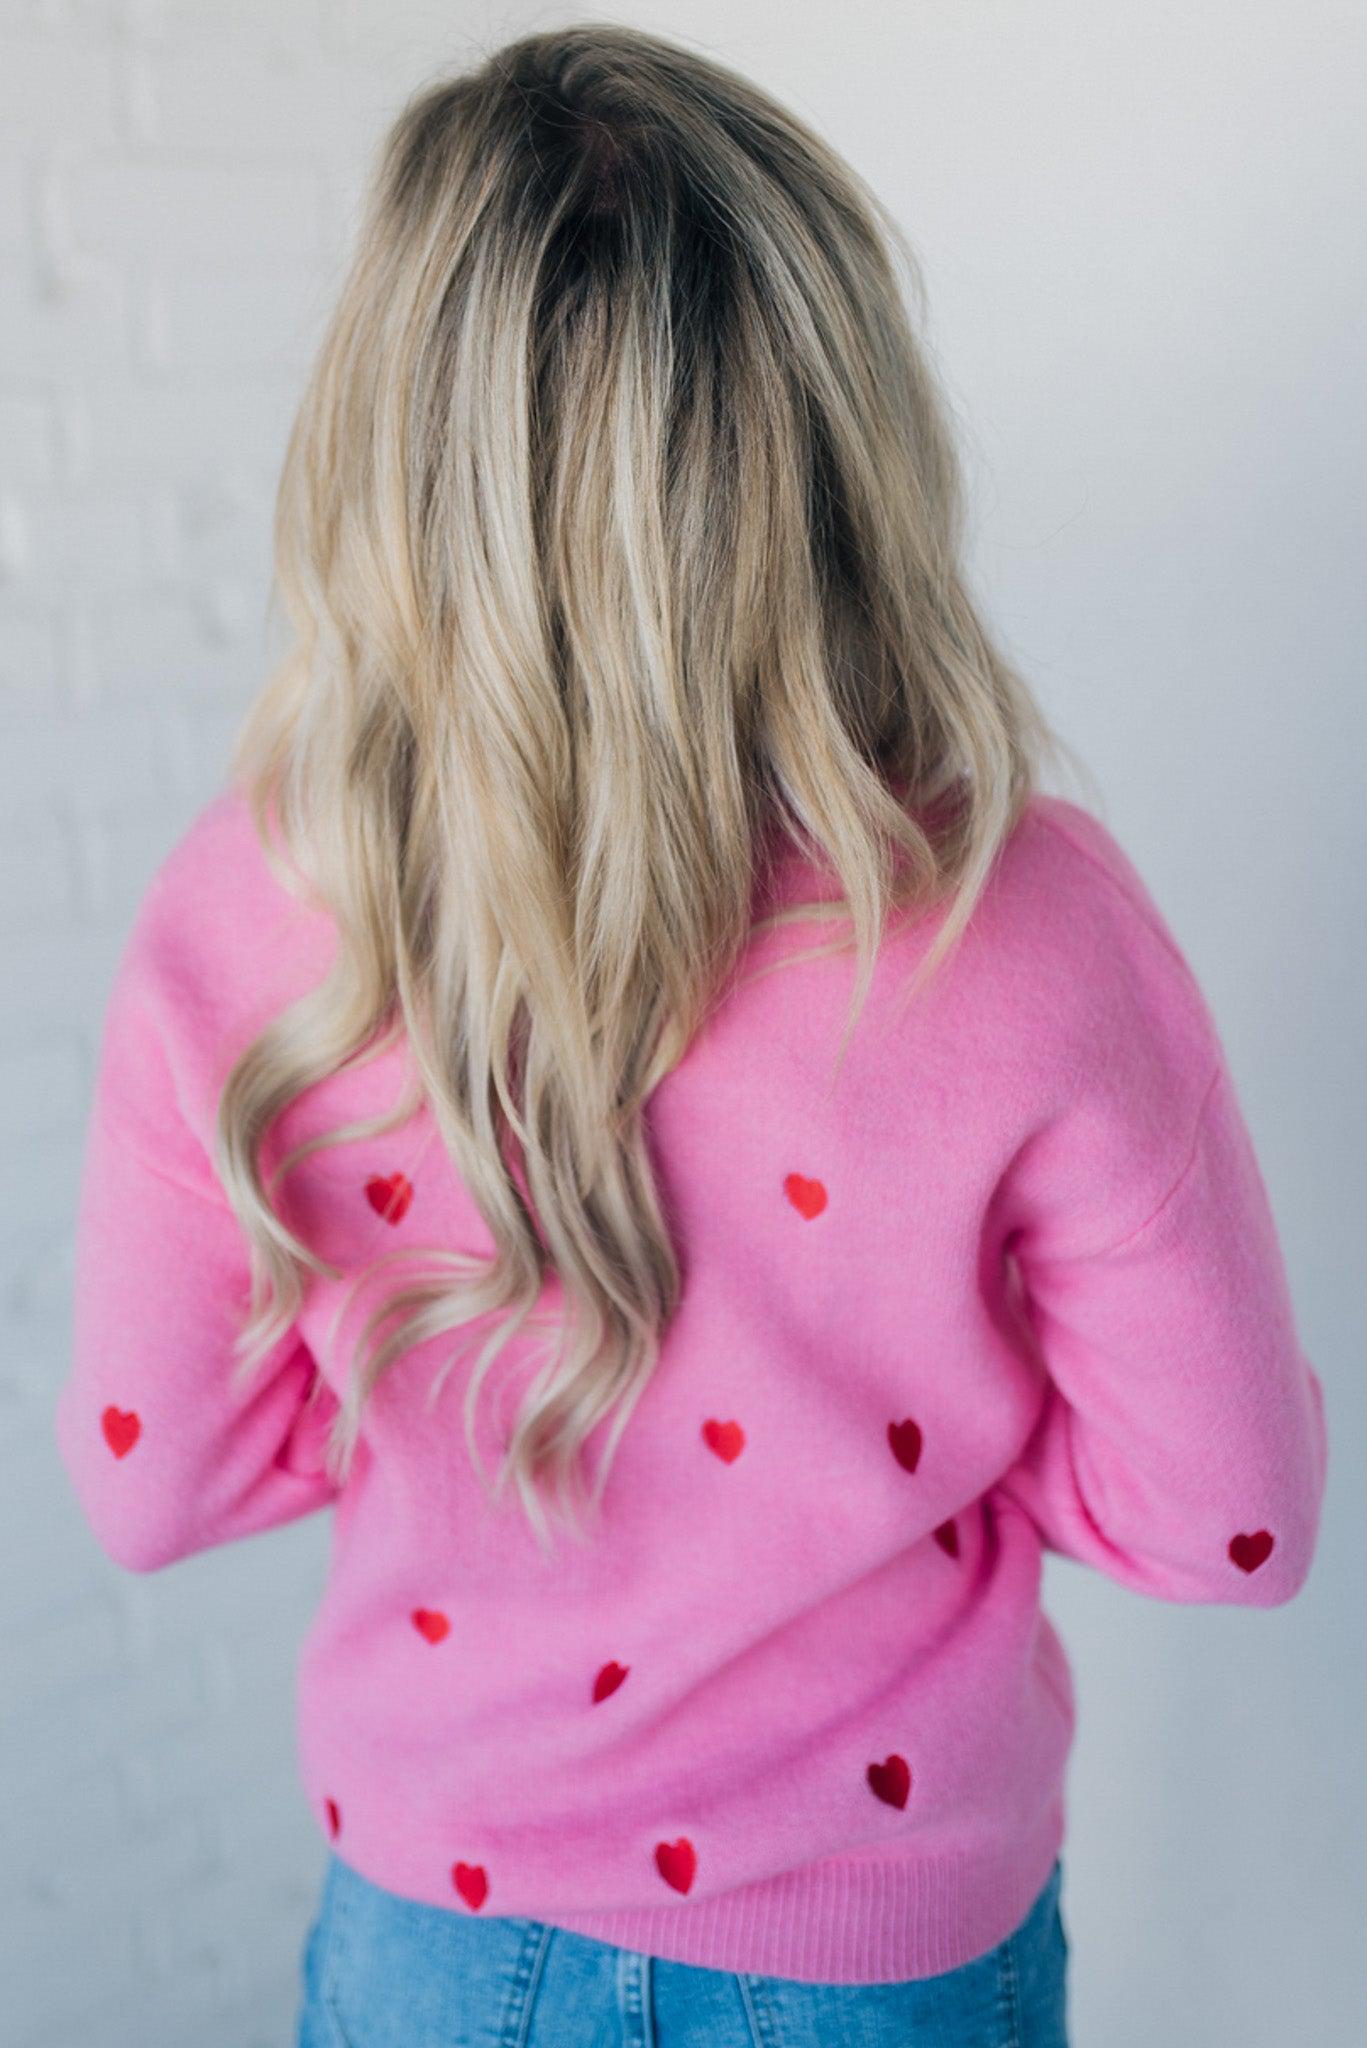 All Over Hearts Embroidered Sweater